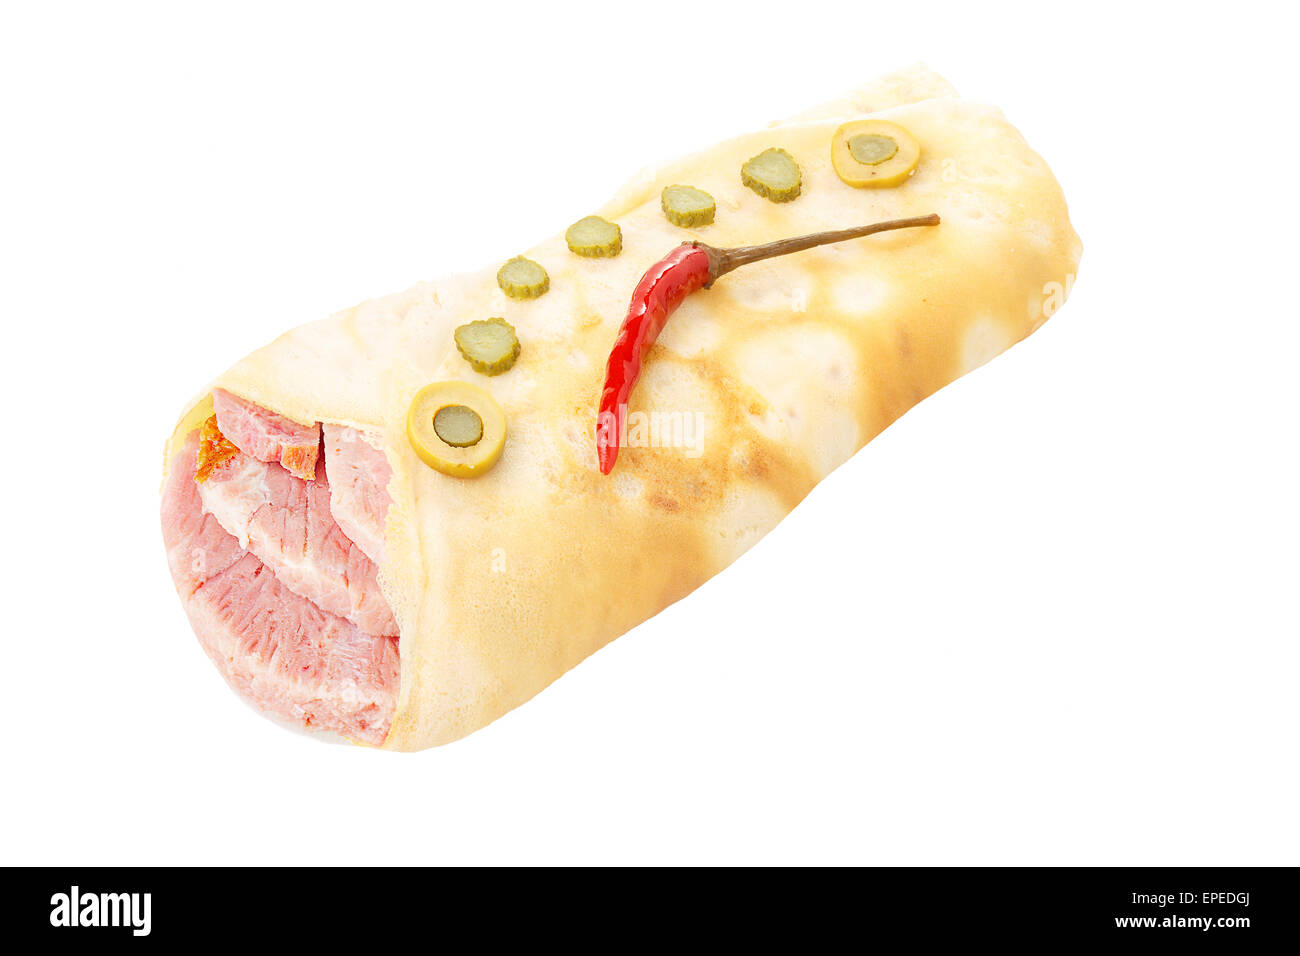 Elegant, neat,hearty crepe stuffed with salty meat isolated on white shadowless. Stock Photo